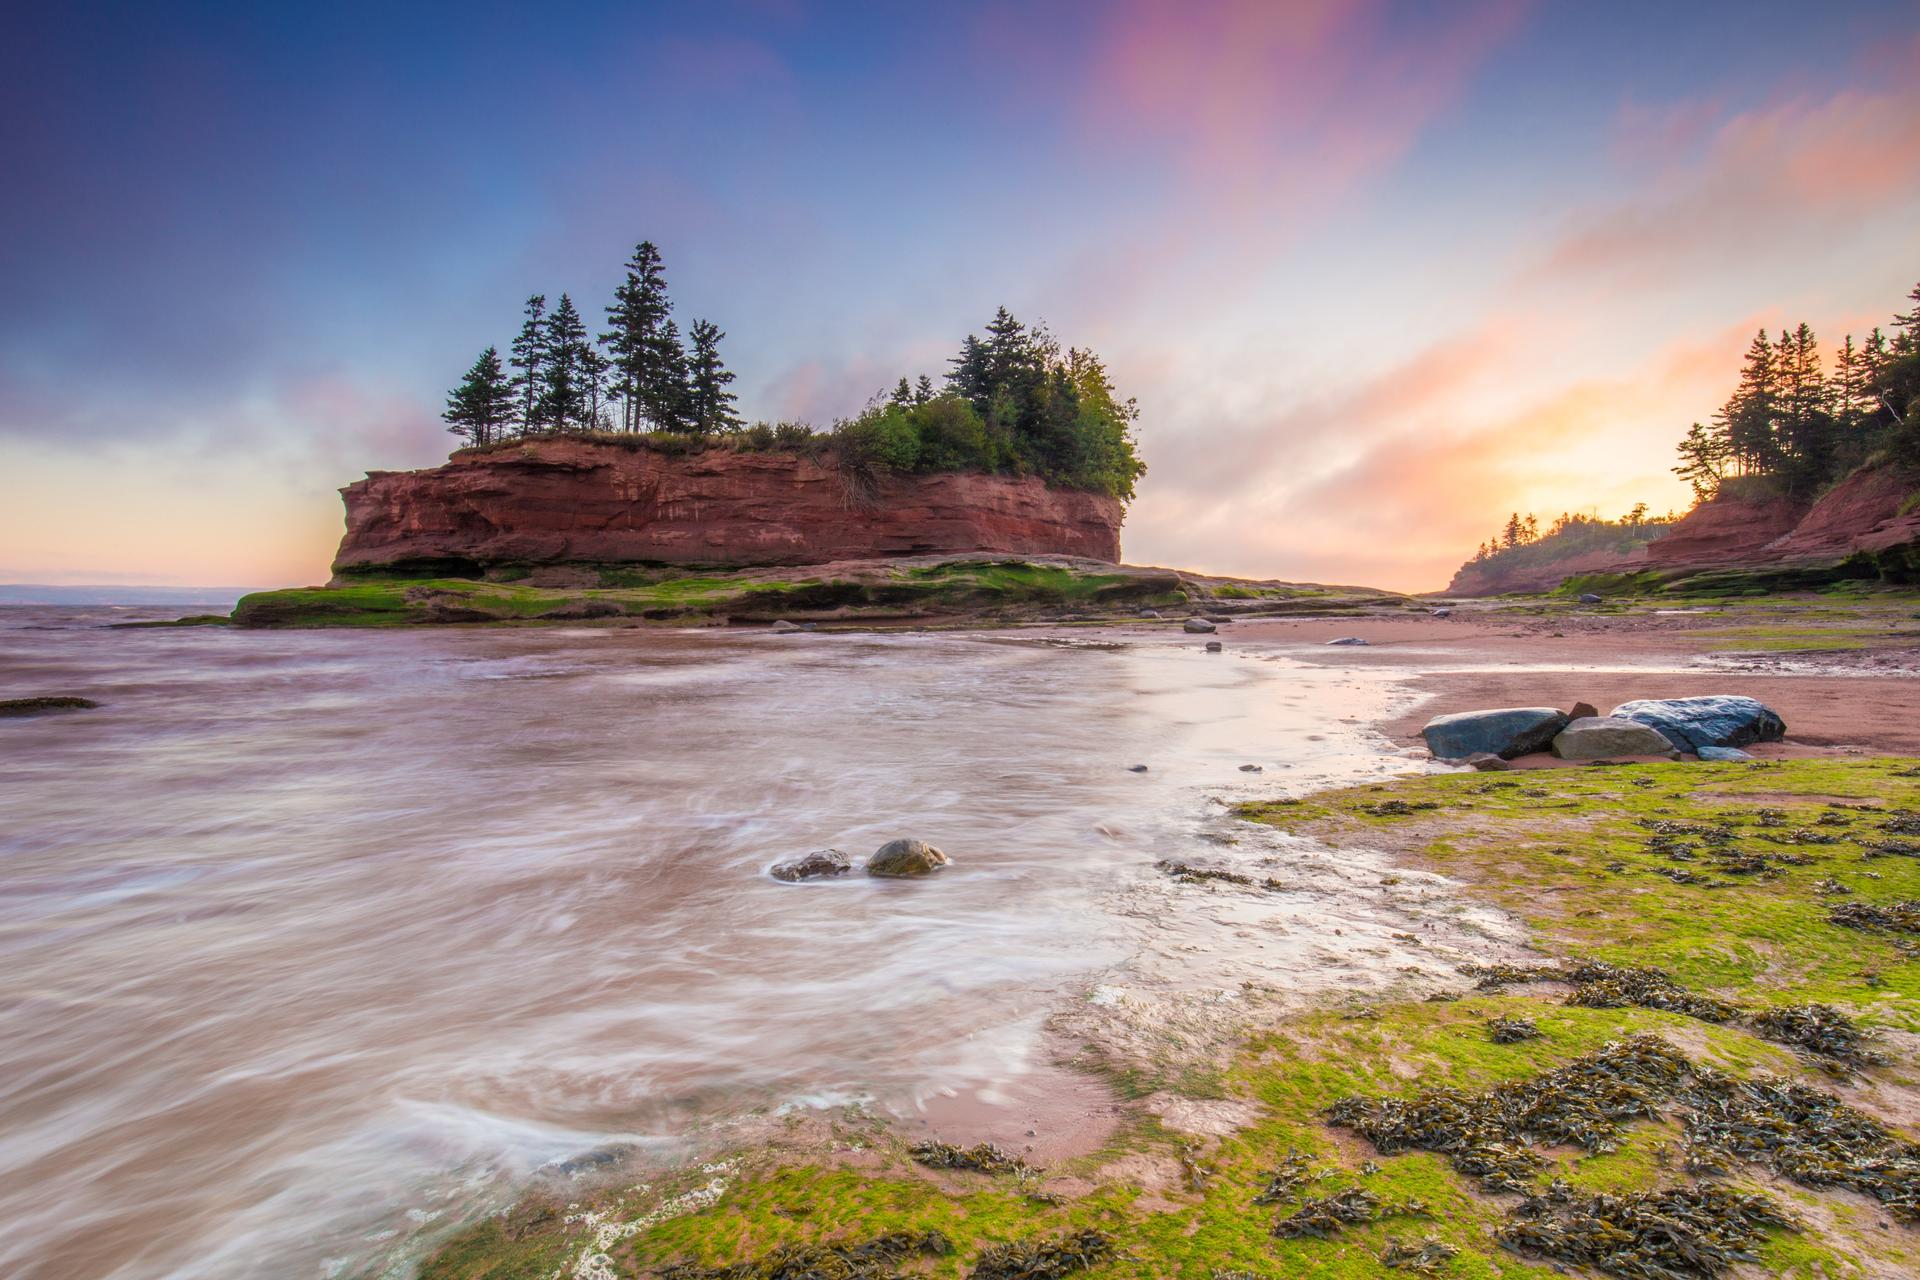 Burntcoat Head Park, Bay of Fundy, where the highest tides in the world are recorde